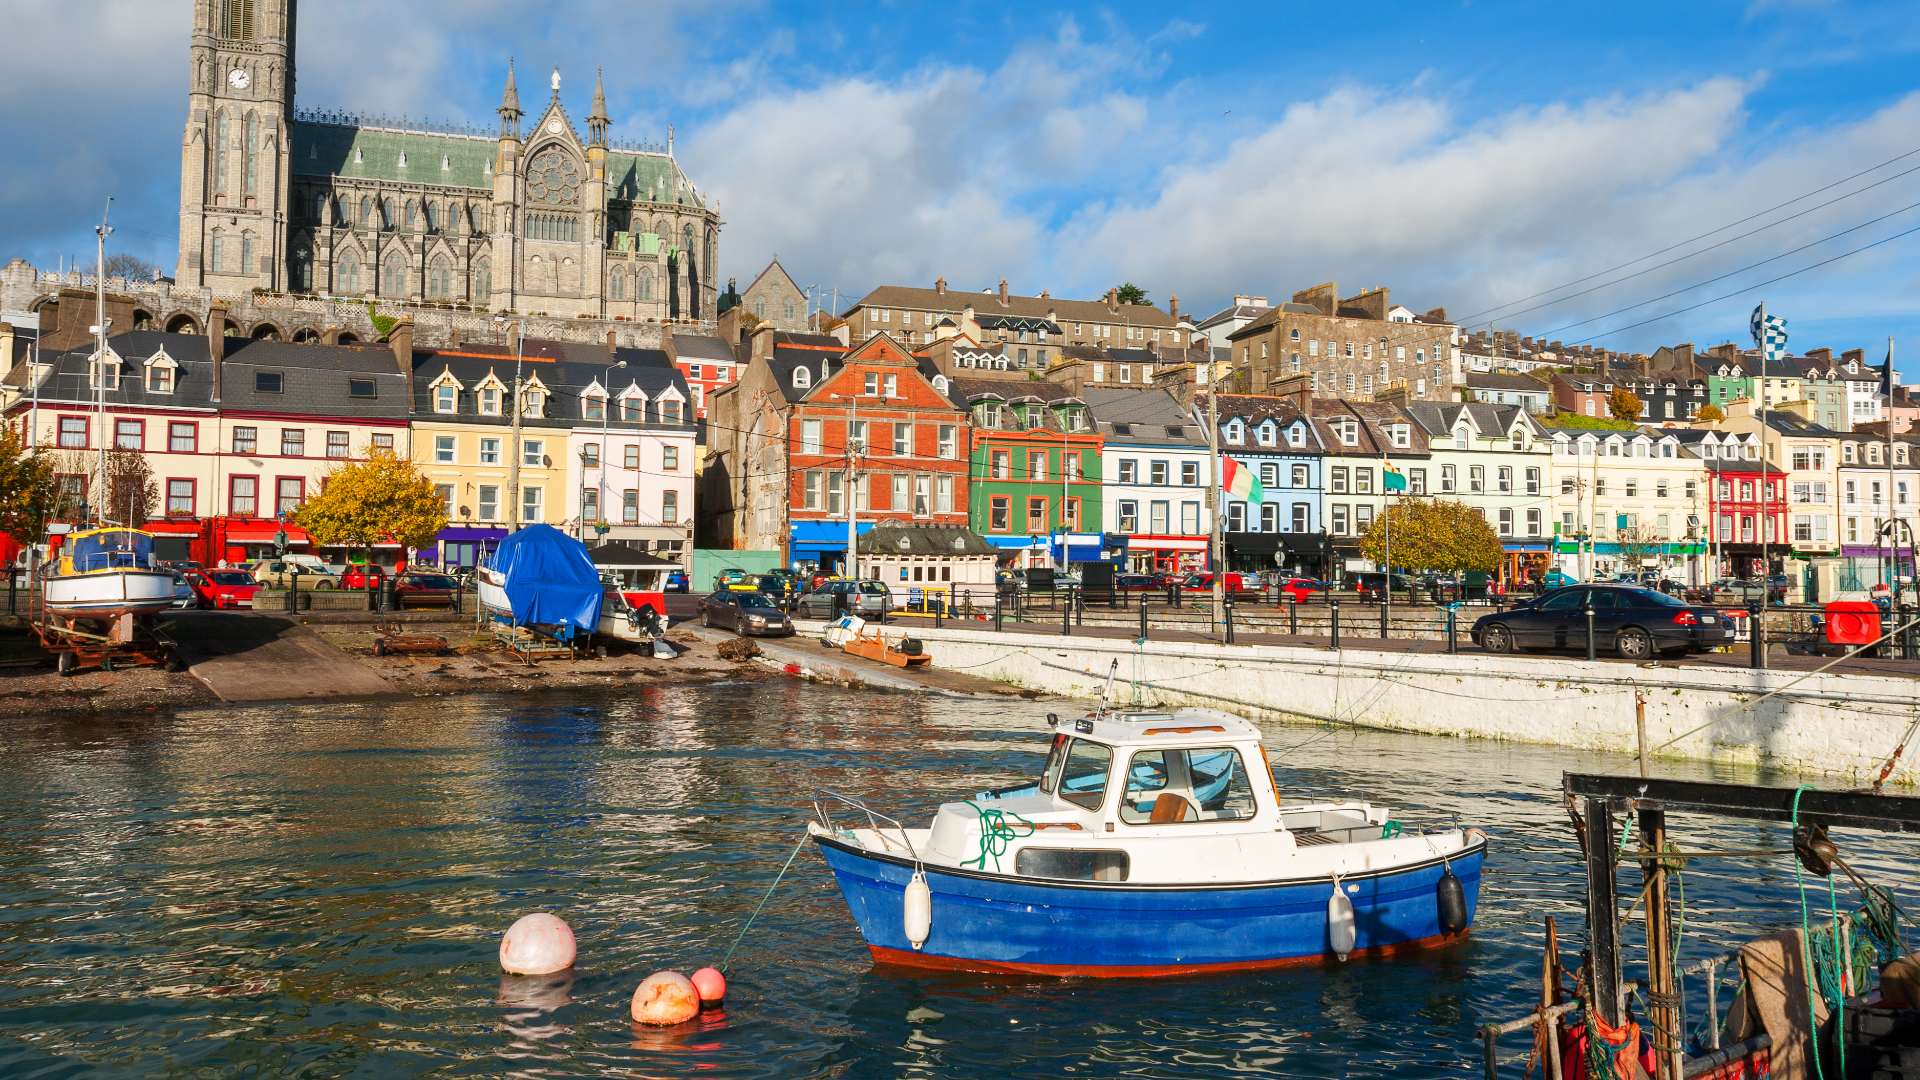 The harbour at Cobh. County Cork, Ireland